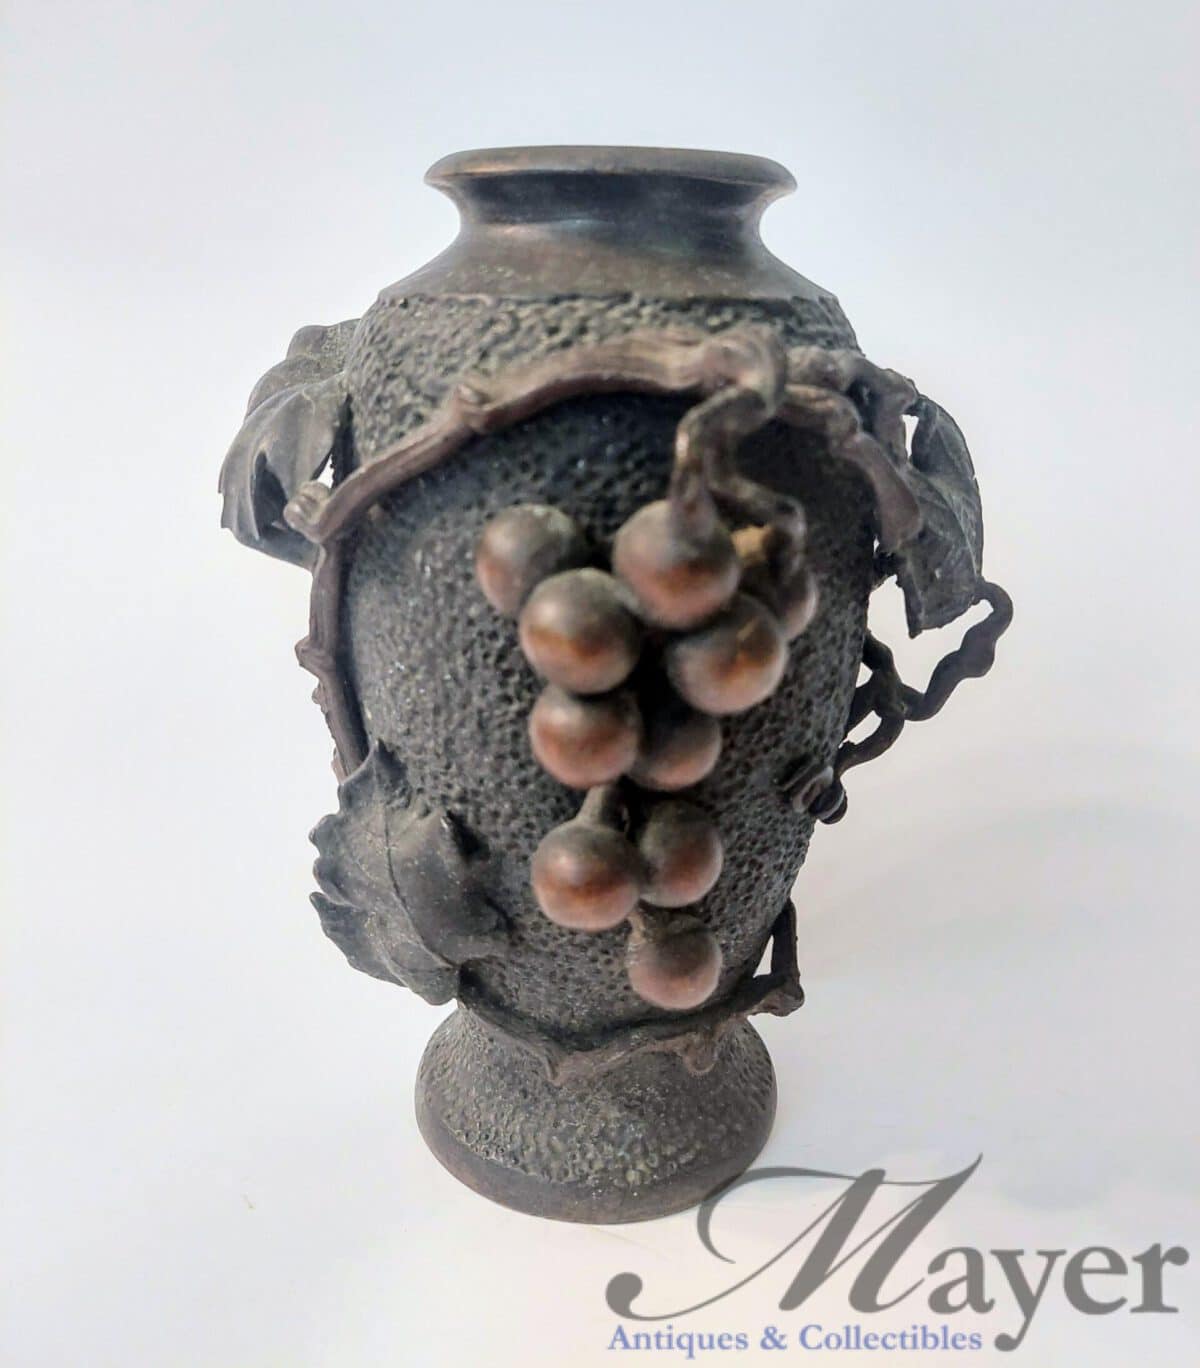 Japanese Bronze Vase Decorated with Grapes and Vines.